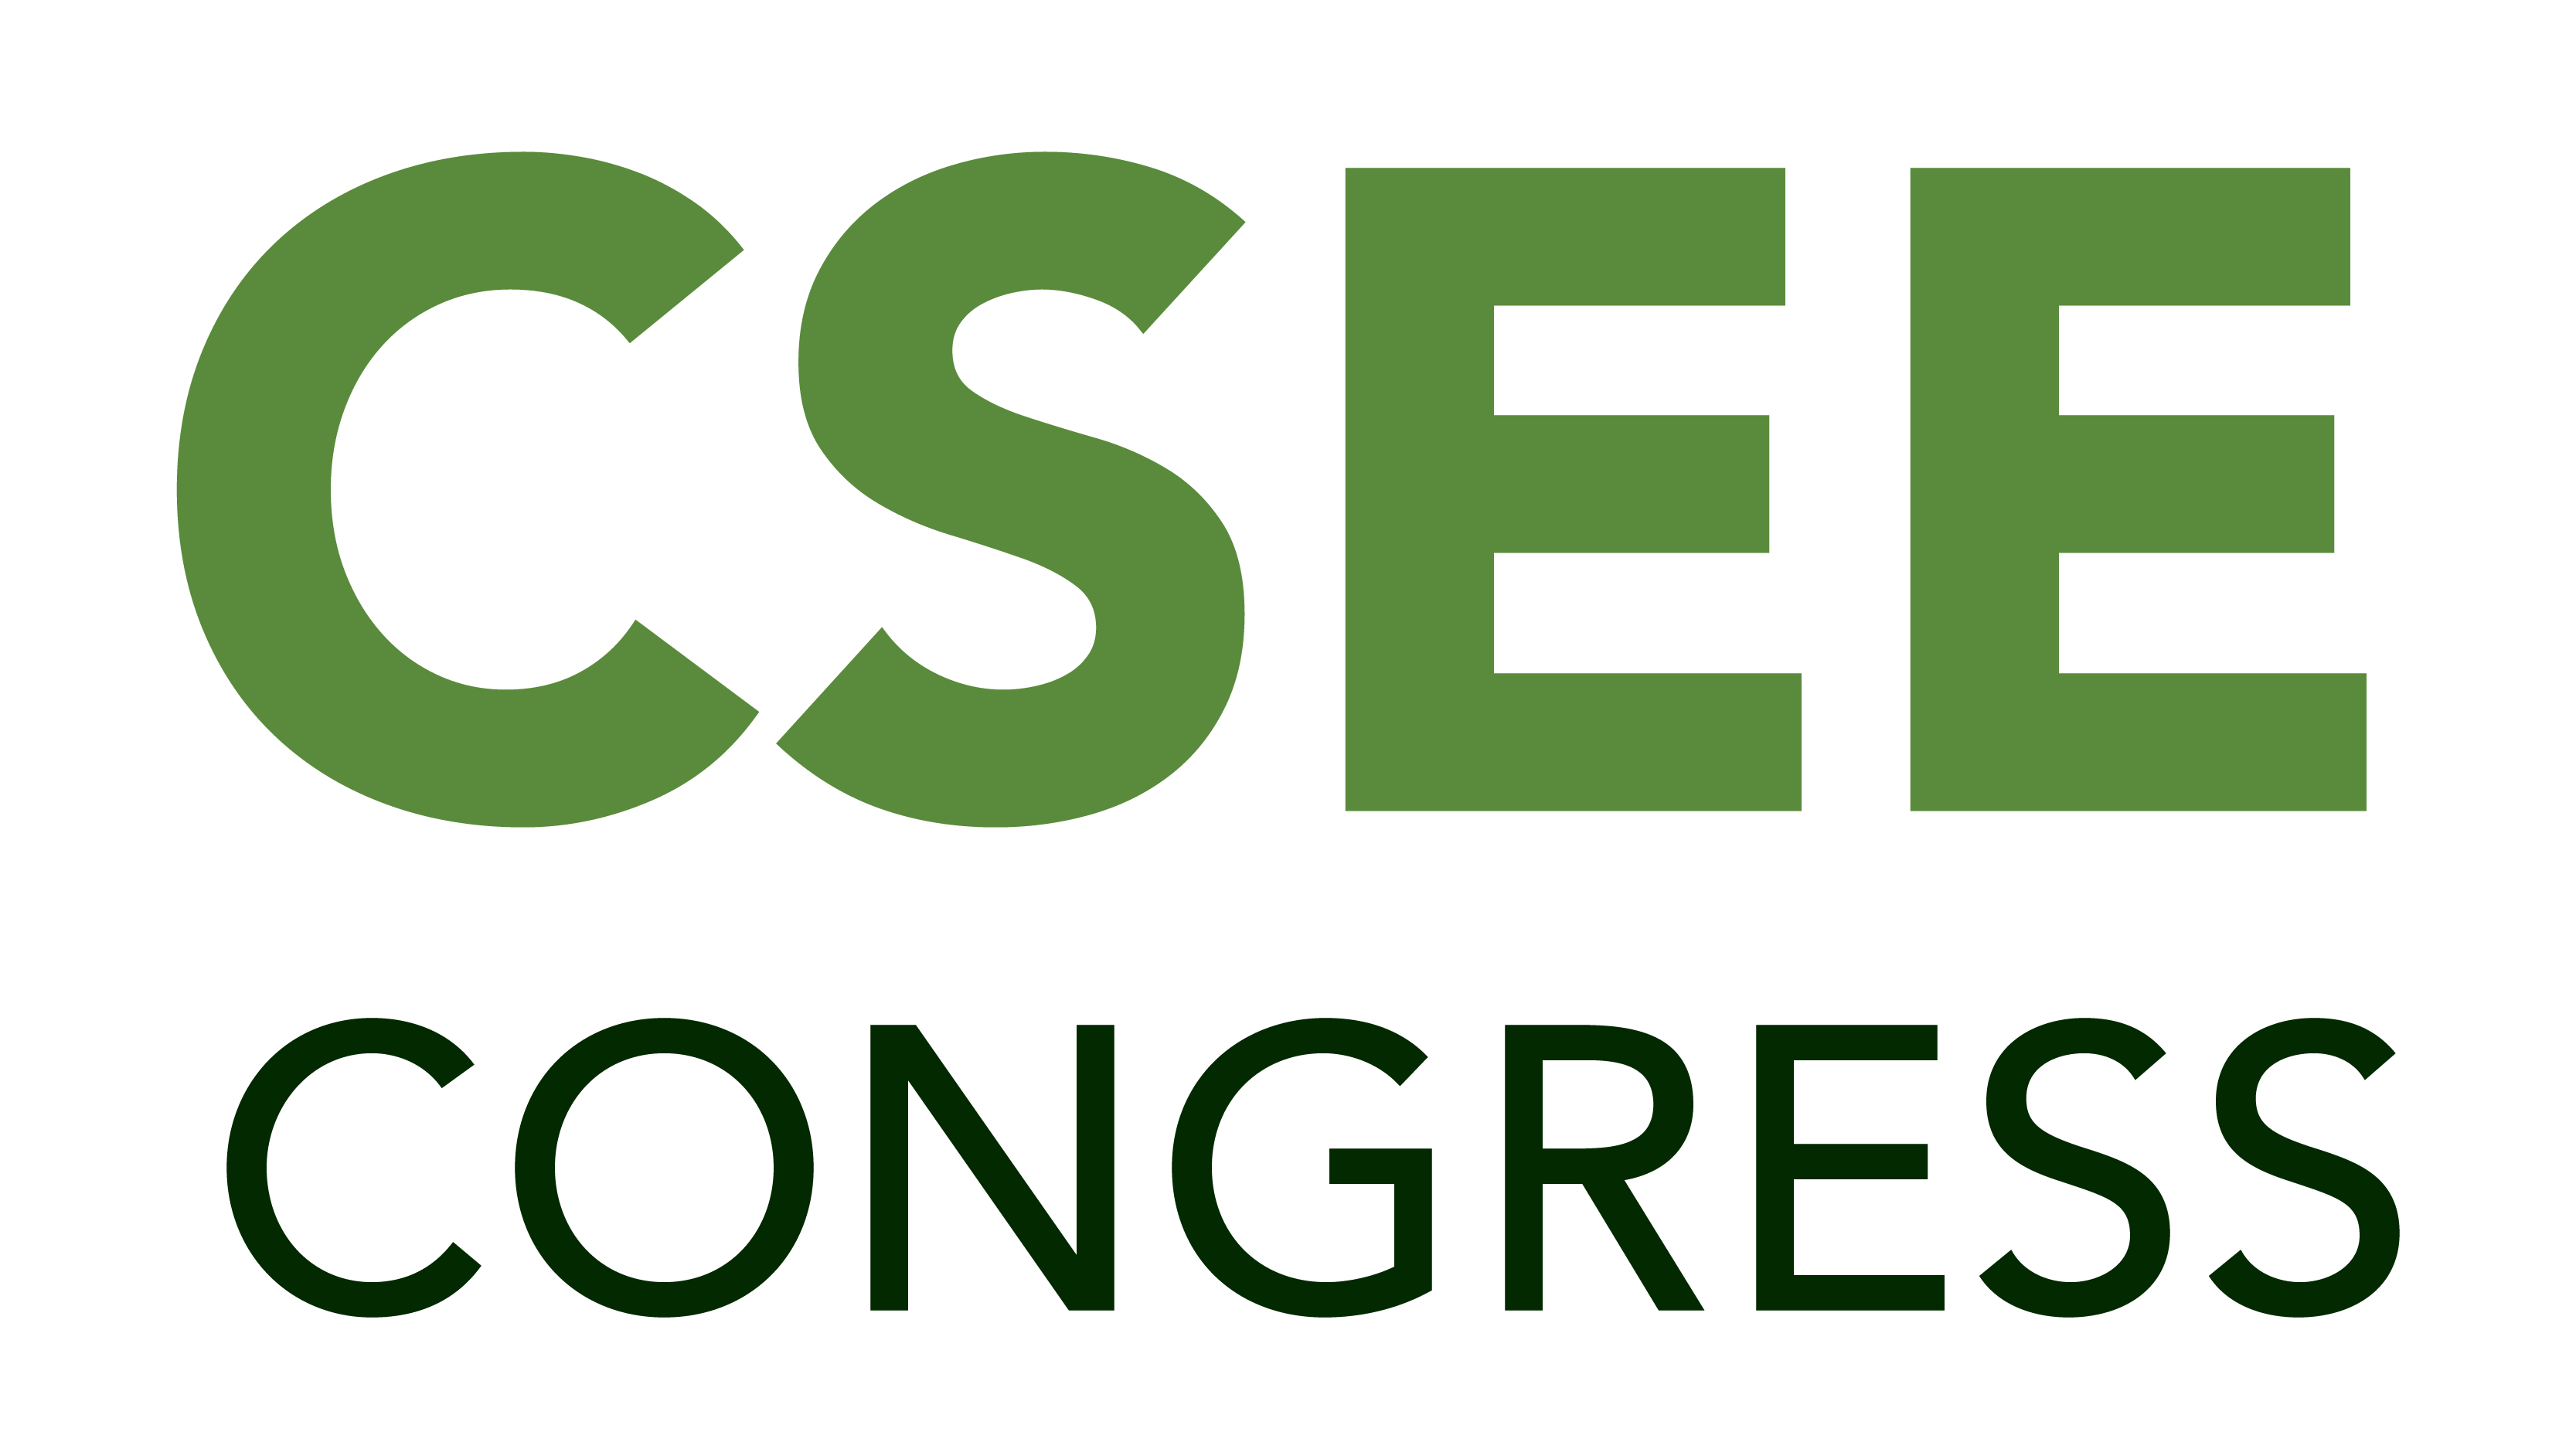 3rd World Congress on Civil, Structural, and Environmental Engineering, Budapest, Hungary, April 8 - 10, 2018